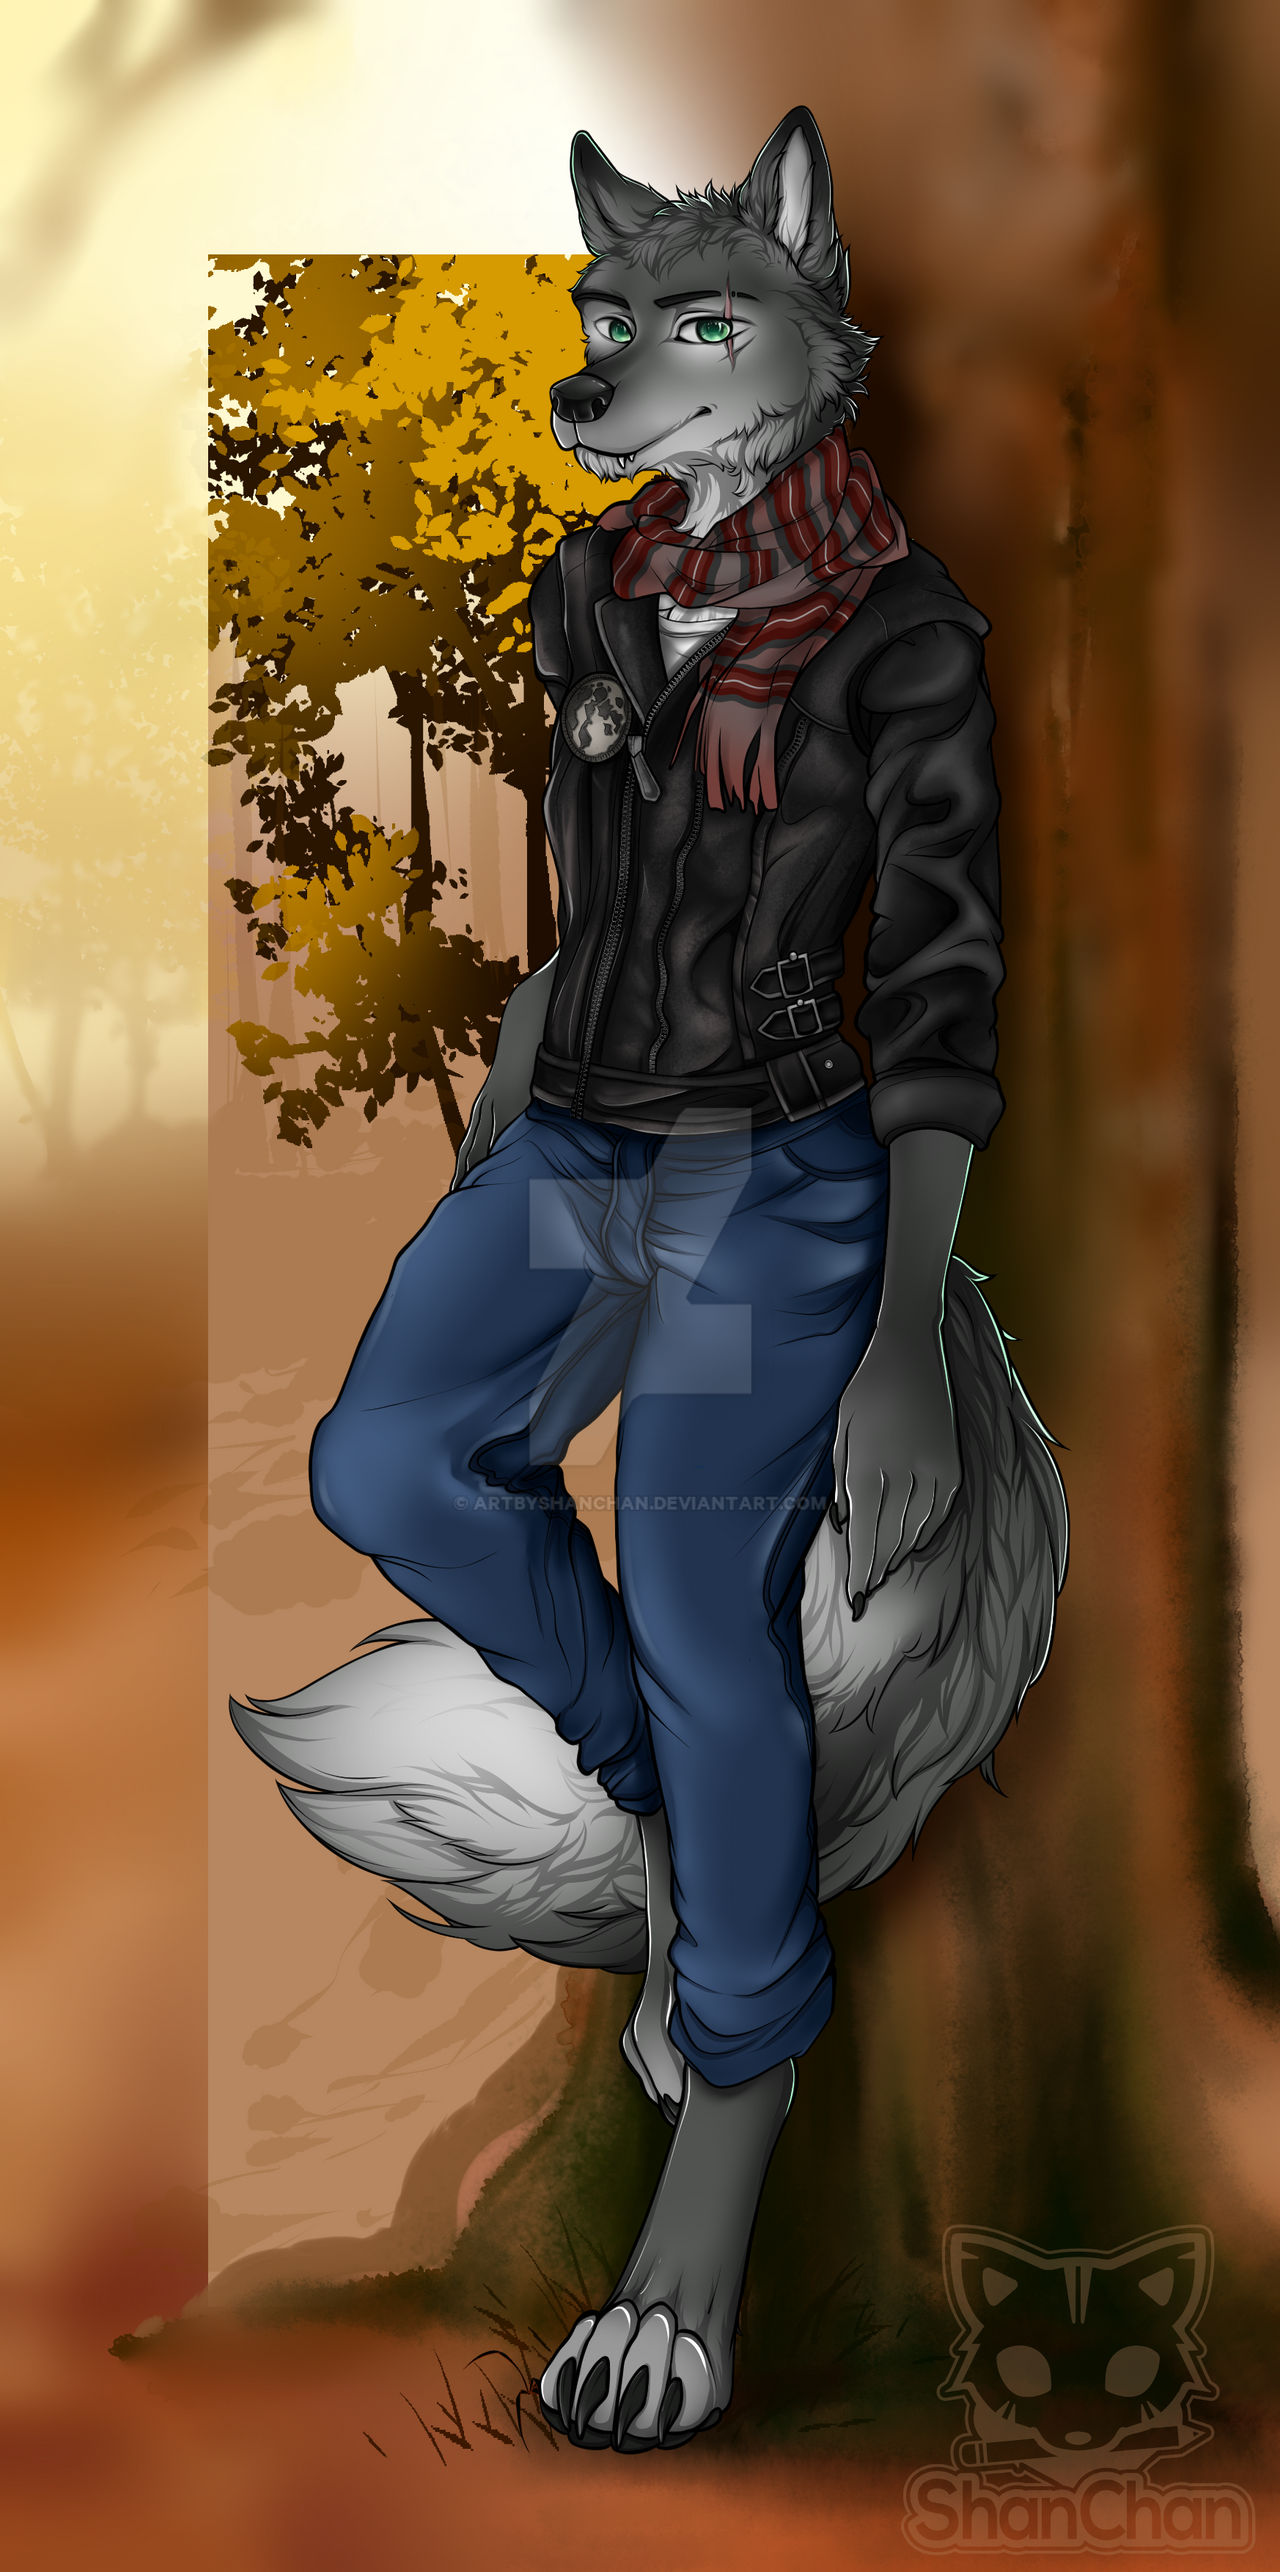 Full Body Anthro Wolf Commission and Sketchy BG by ArtByShanChan on  DeviantArt